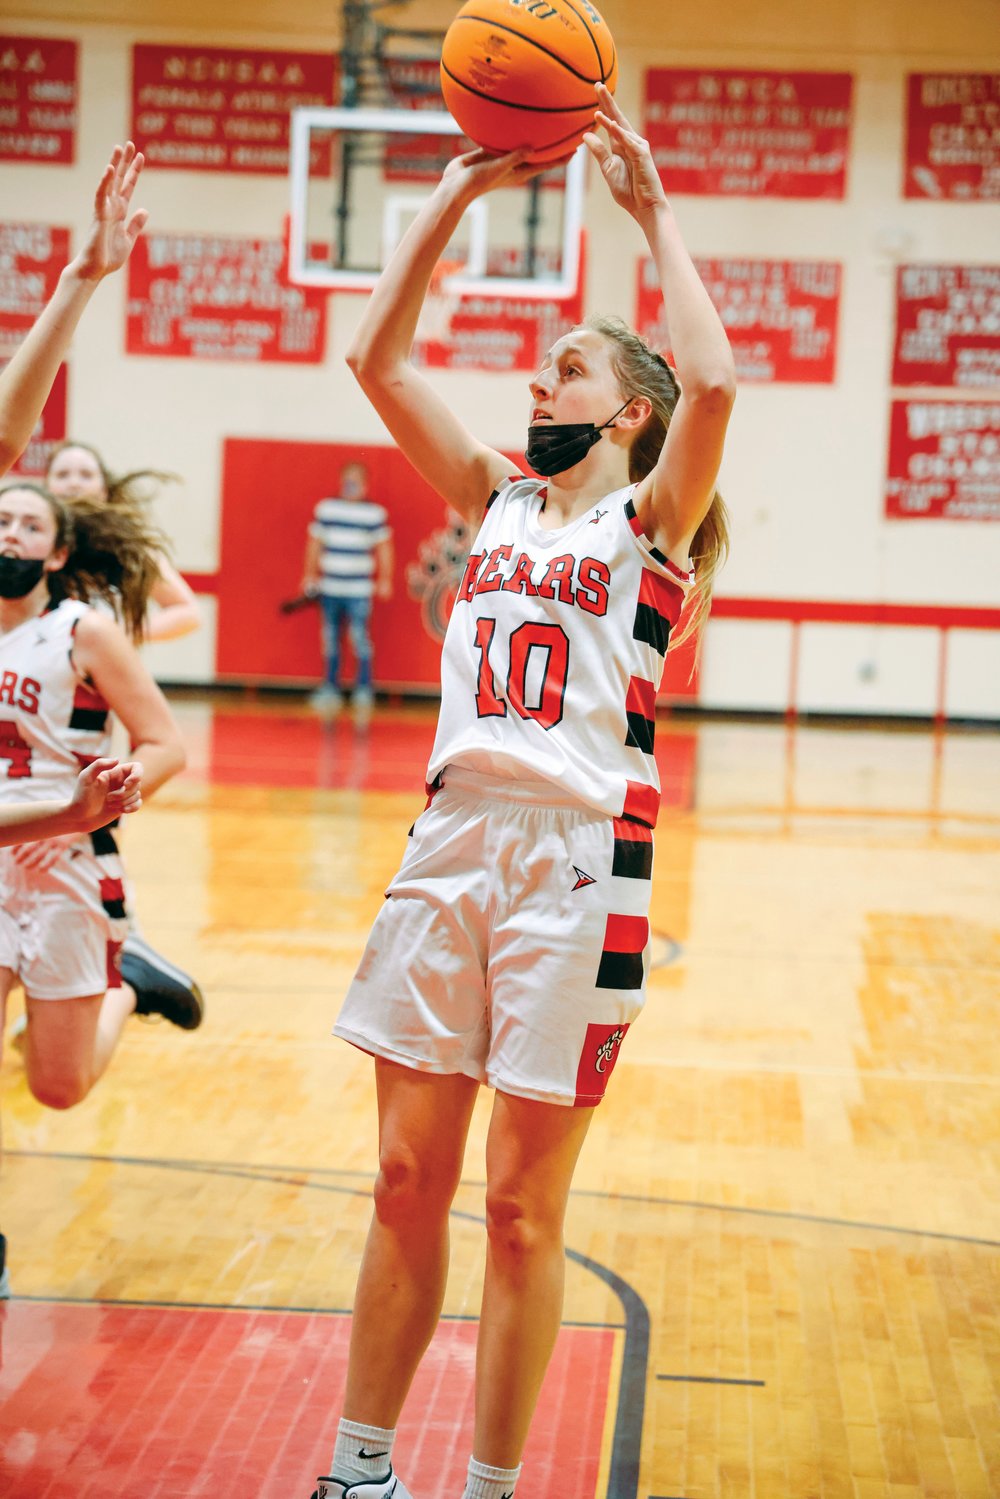 Chatham Central senior Kailey Green (10) pulls up for a short jumper in the Bears' 50-36 win over the Jordan-Matthews Jets last Friday. It was the 11th straight victory for the Bears over the Jets, a streak that dates back to 2015.